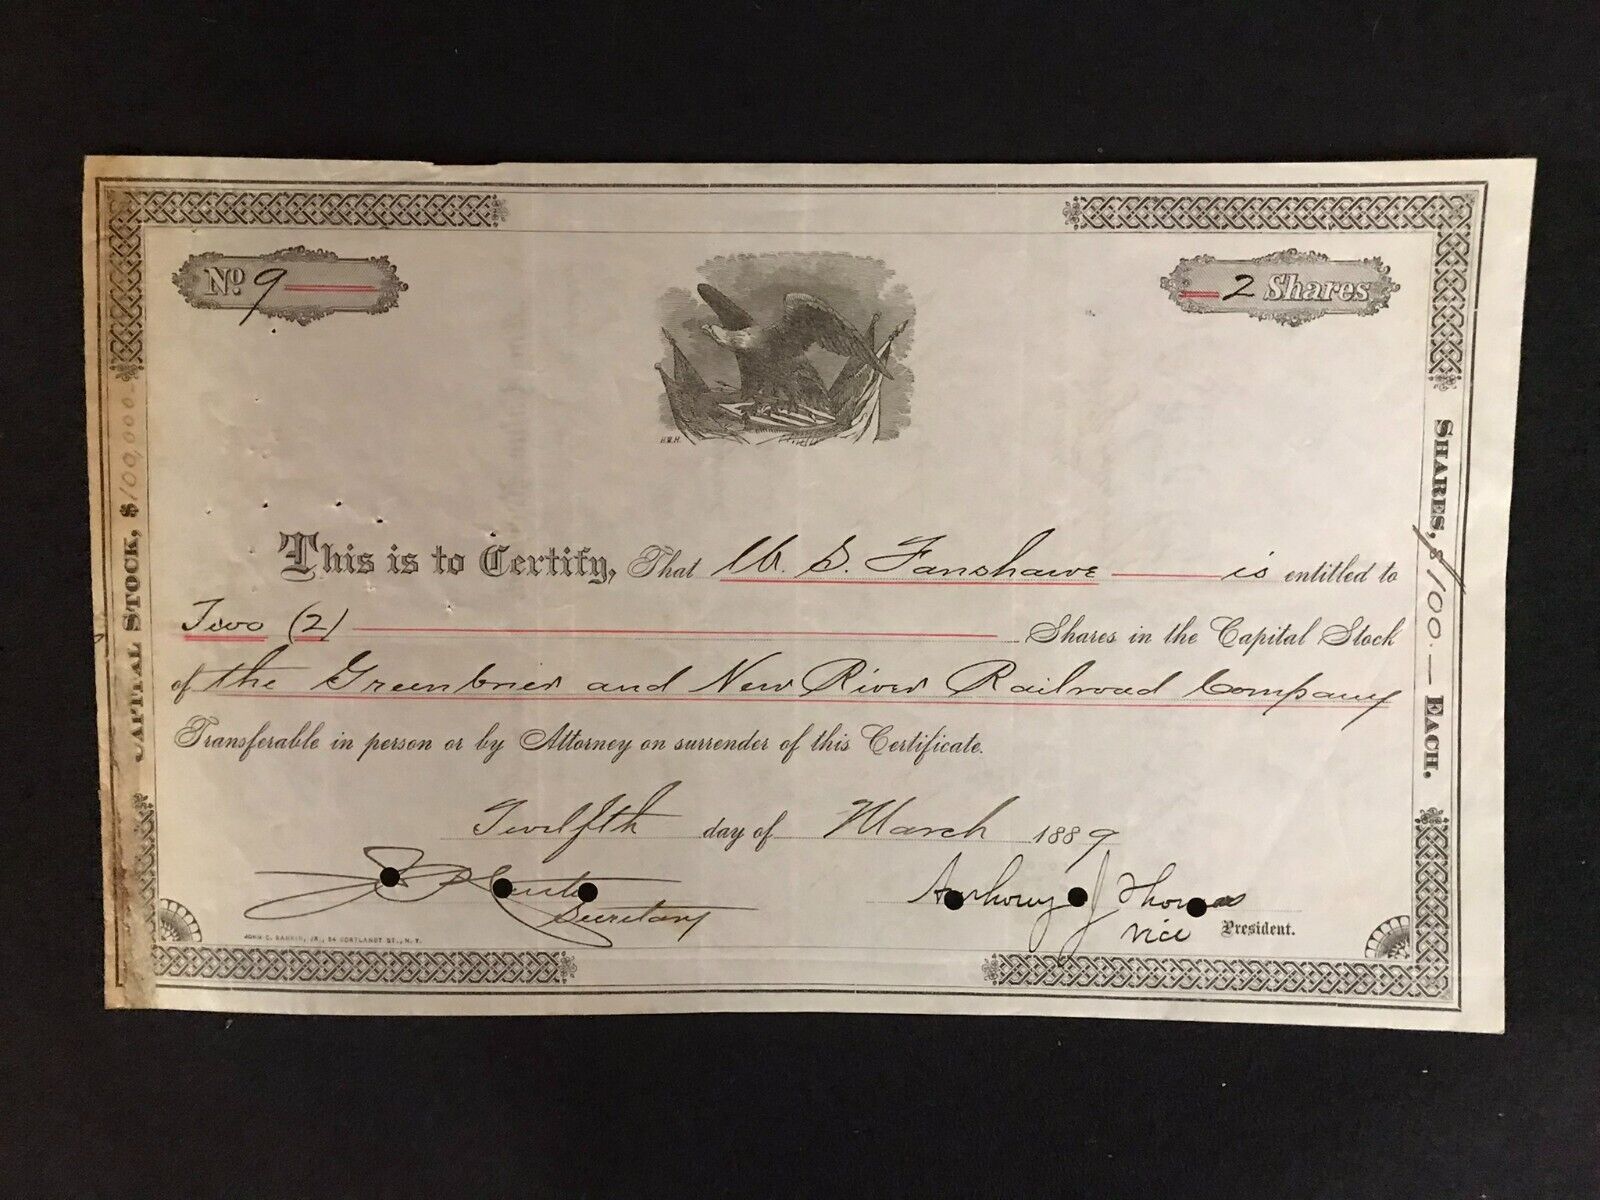 1889 The Greenbrier and New River Railroad Company Stock Certificate